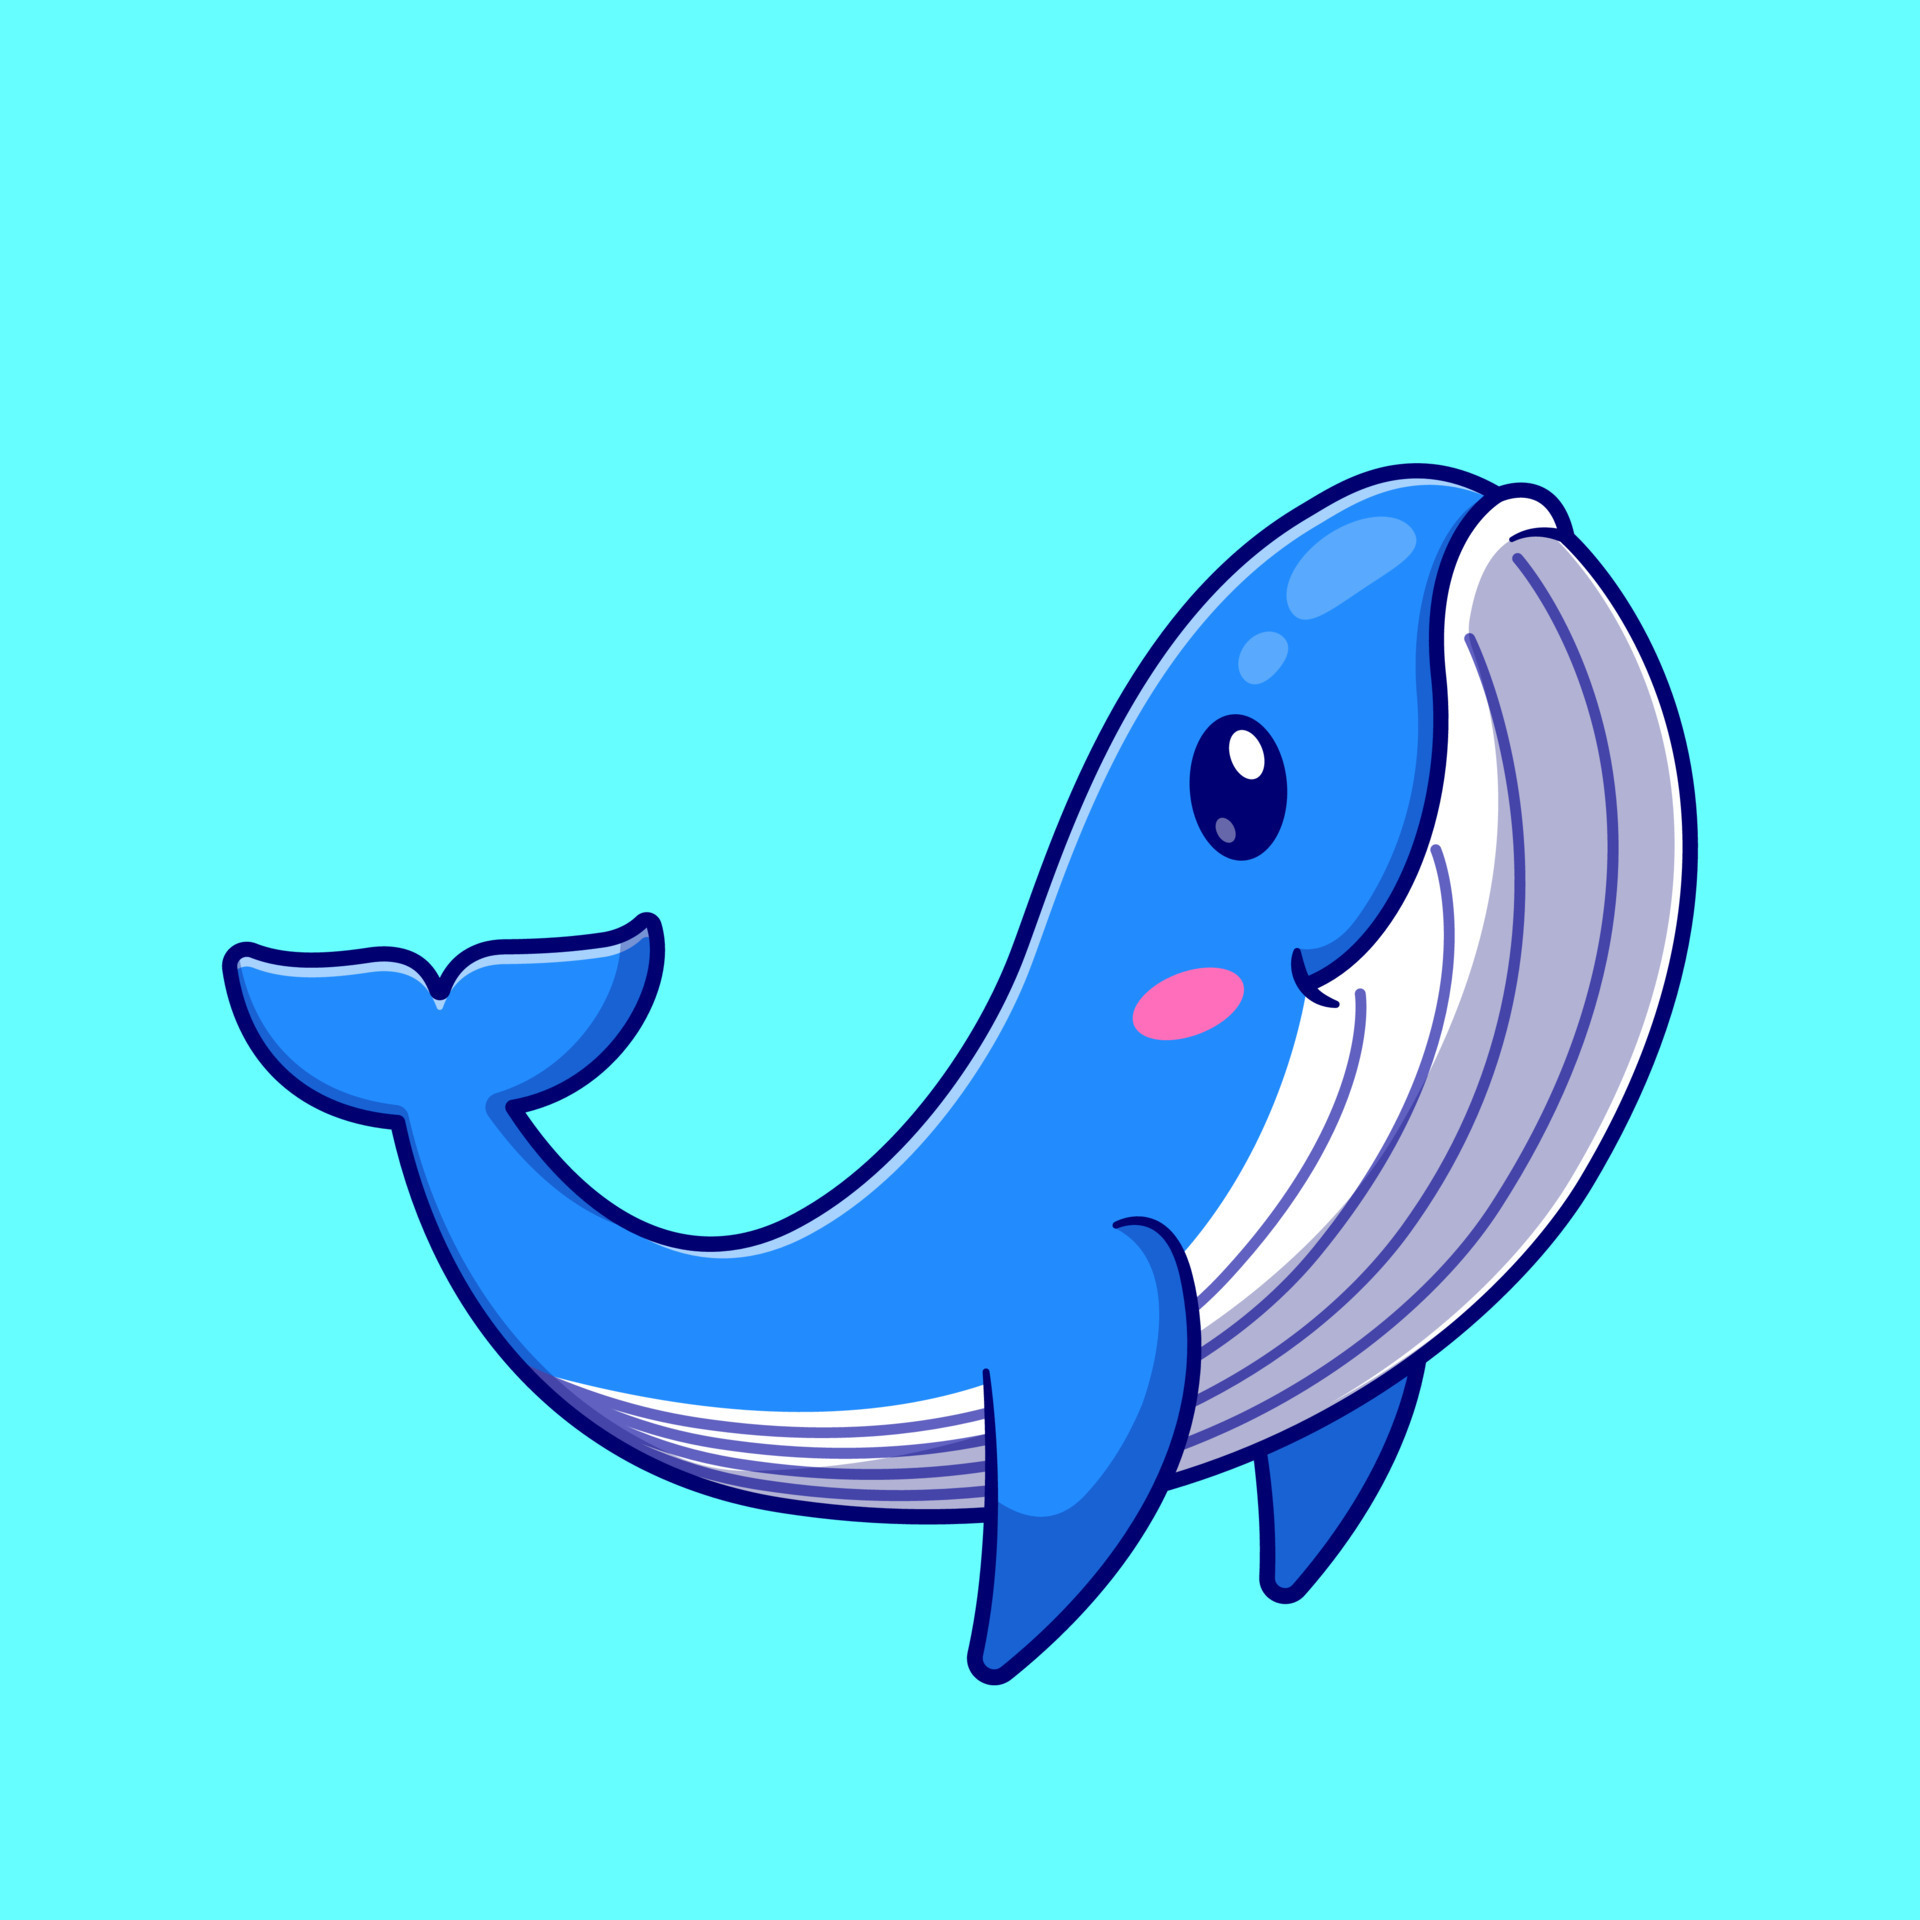 Whale shark cartoon | The ocean's largest fish with a smile just as wide!